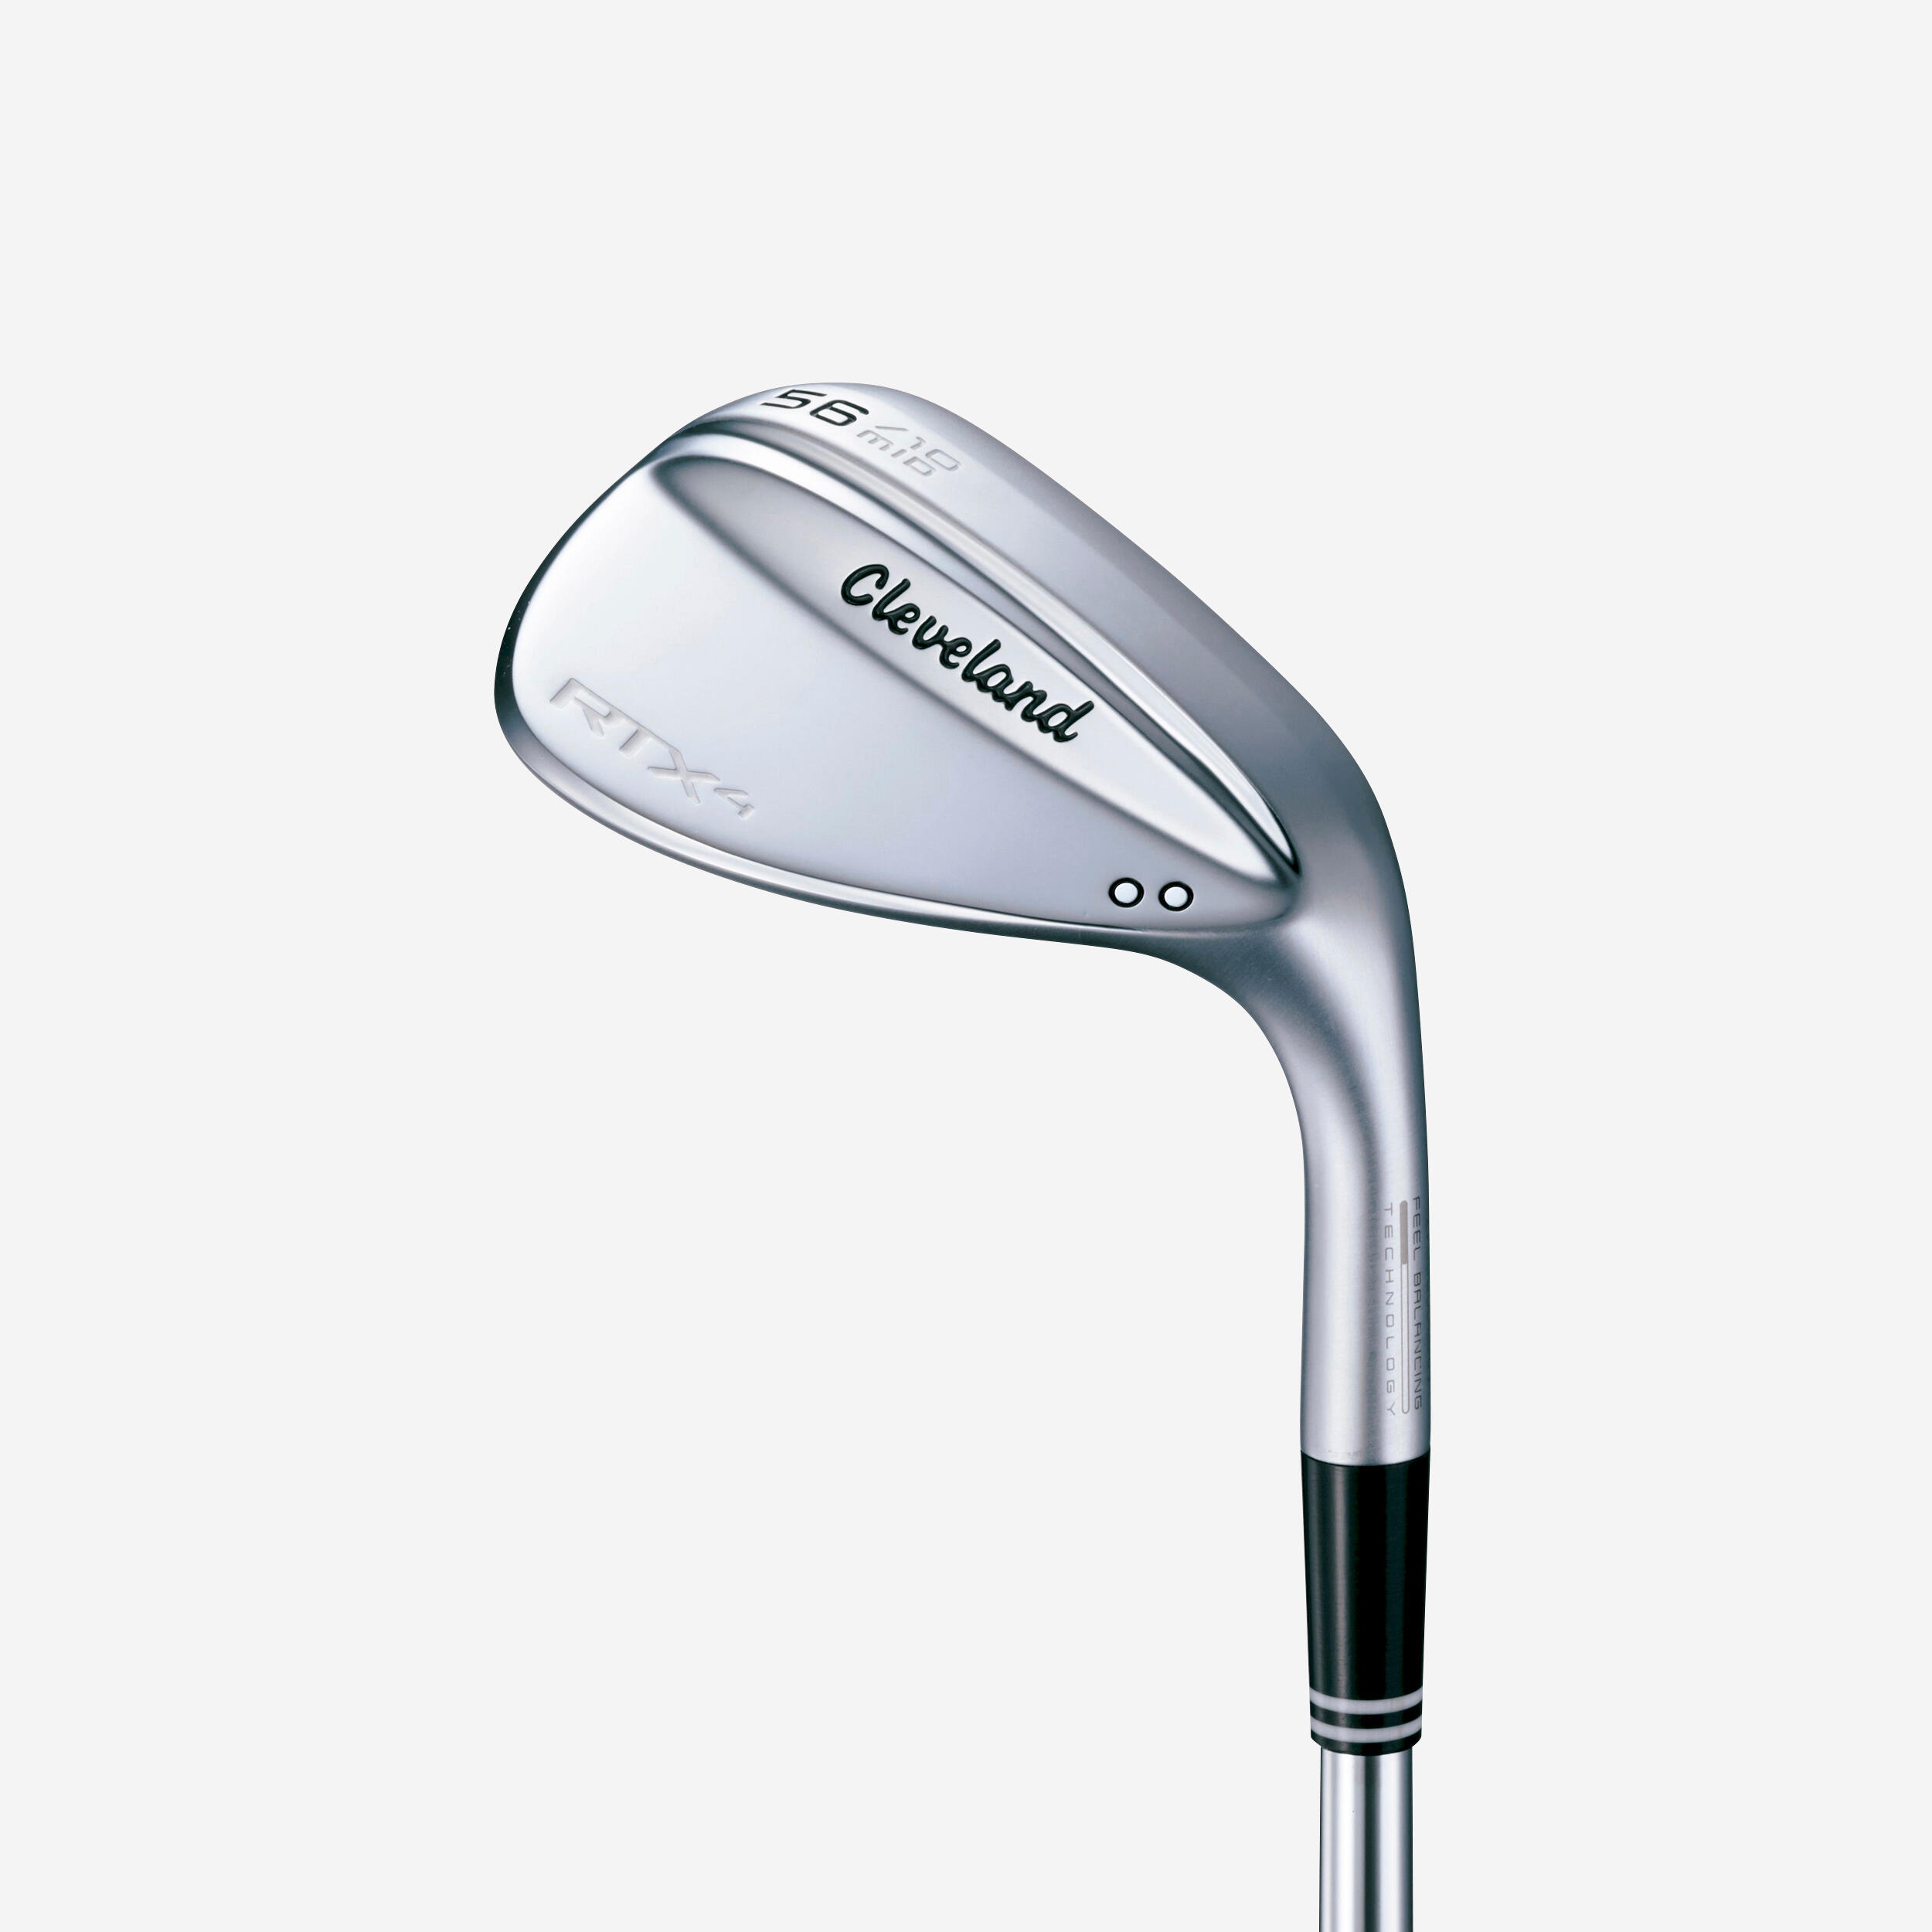 CLEVELAND GOLF Wedge Golf Homme Droitier - Cleveland Rtx4